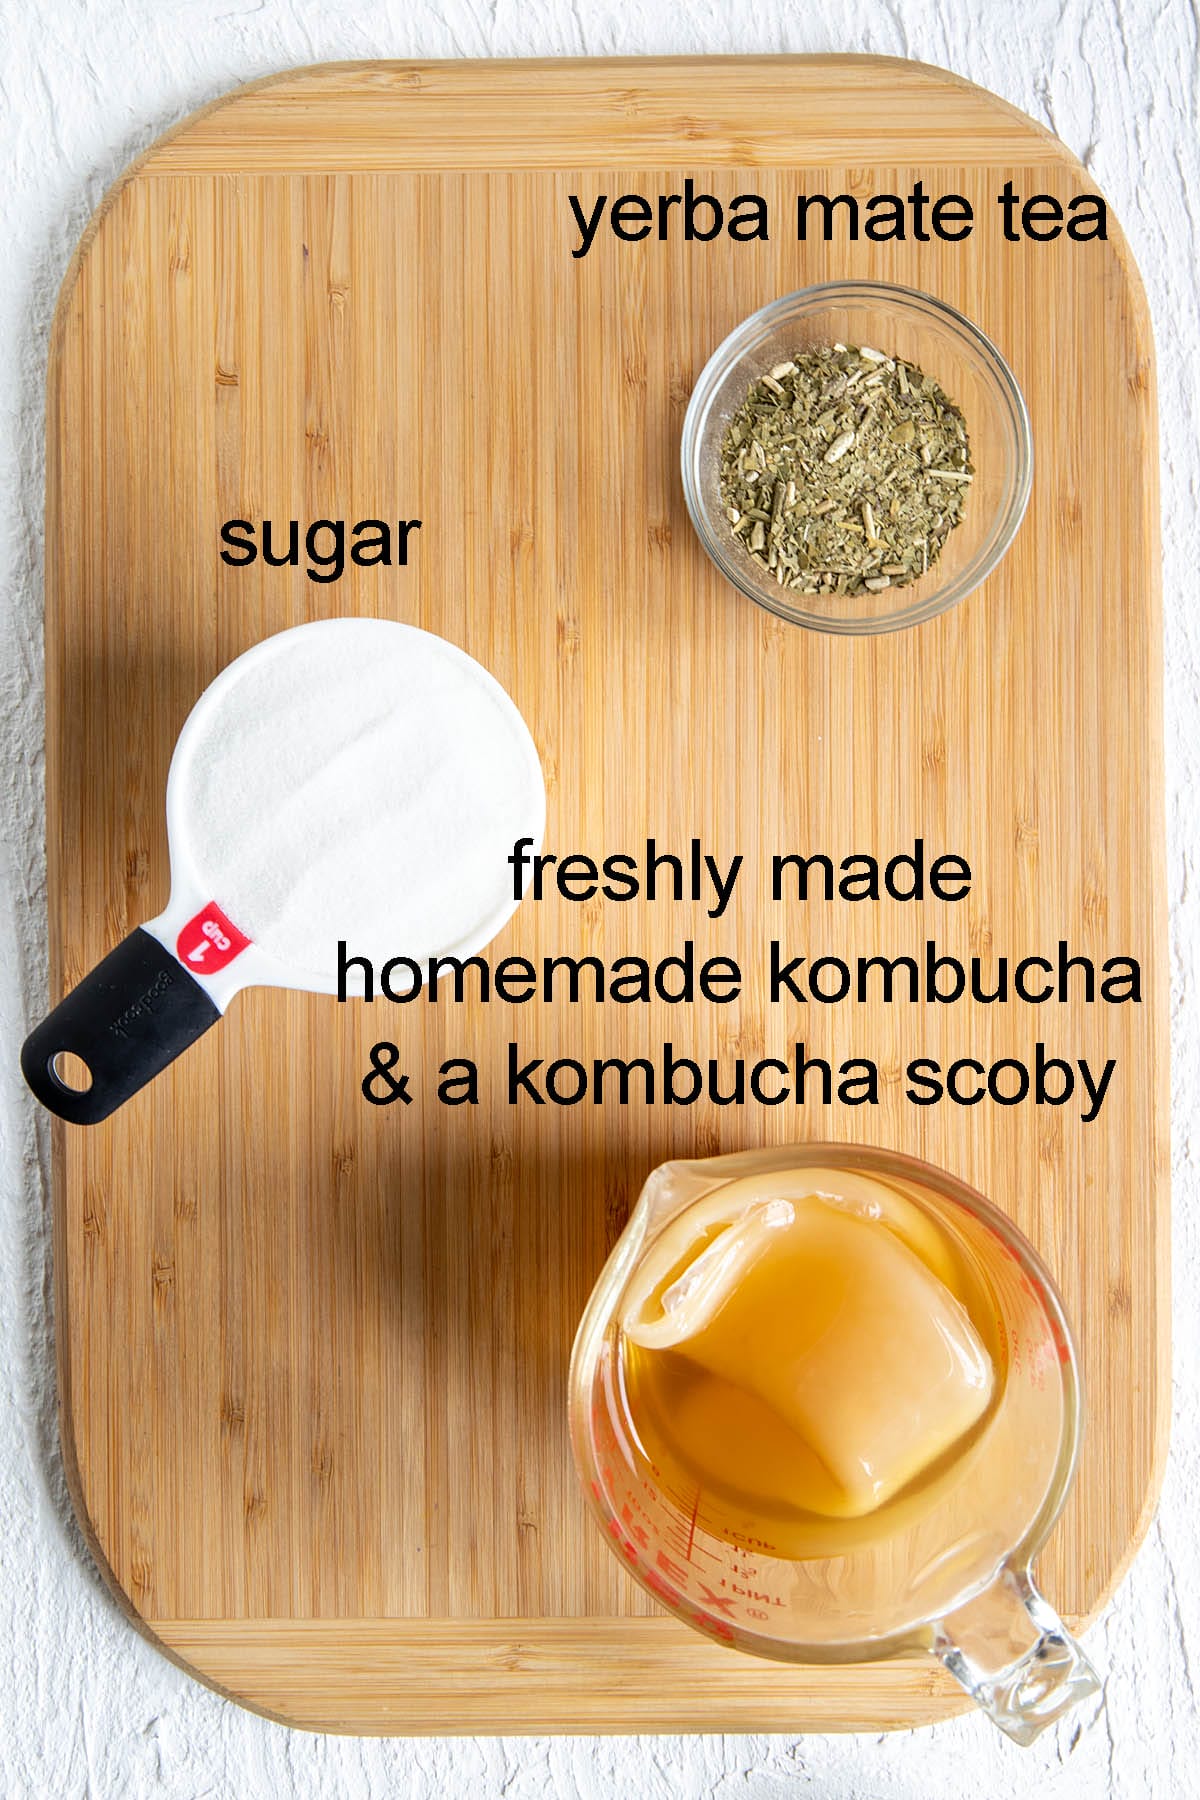 Ingredients for yerba mate kombucha on a cutting board with labels.